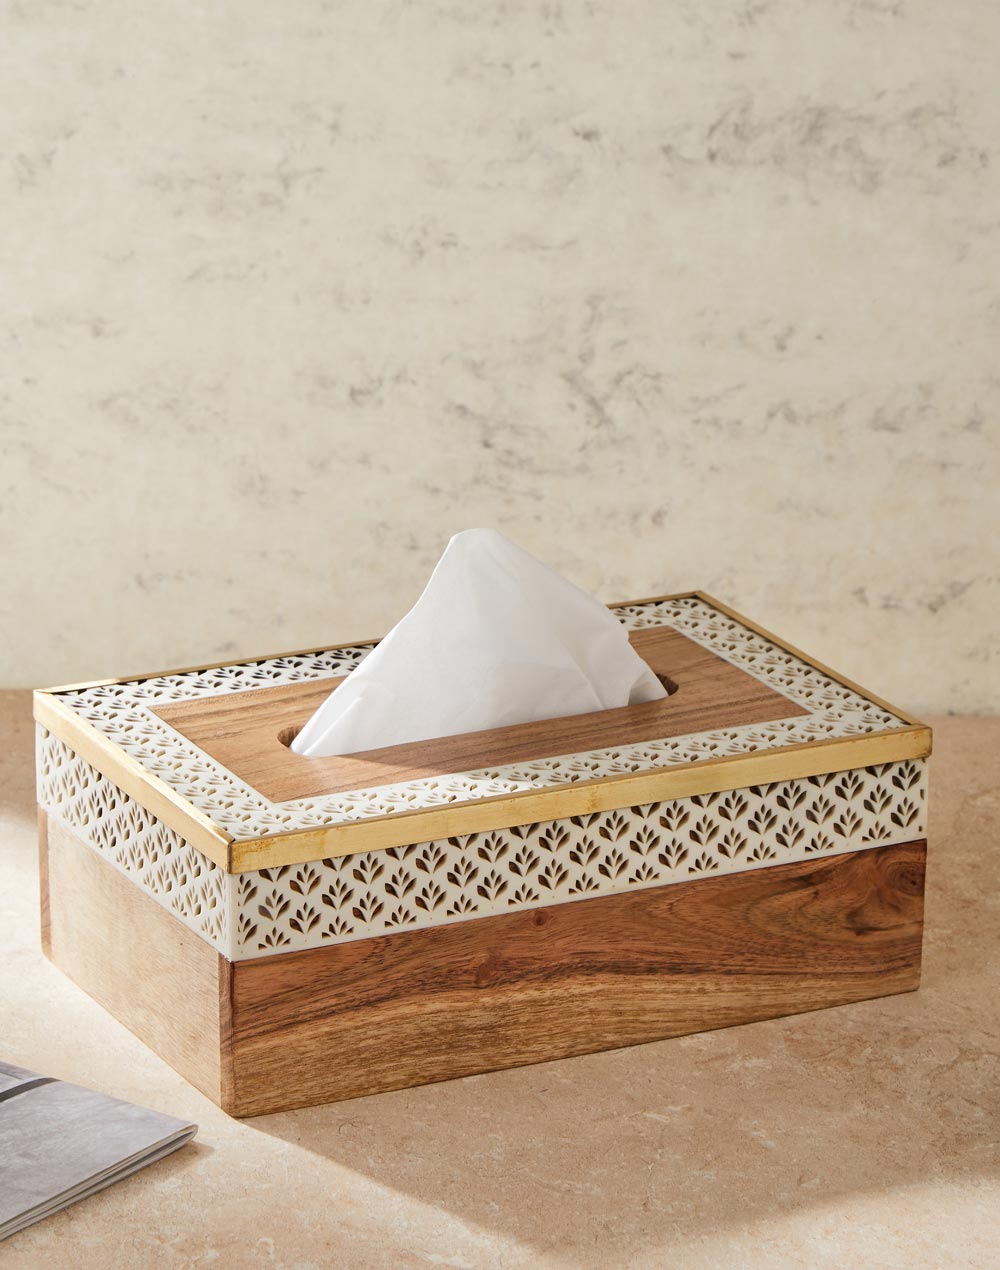 Buy Tissue Boxes, Tissue Paper Box Online at Fabindia